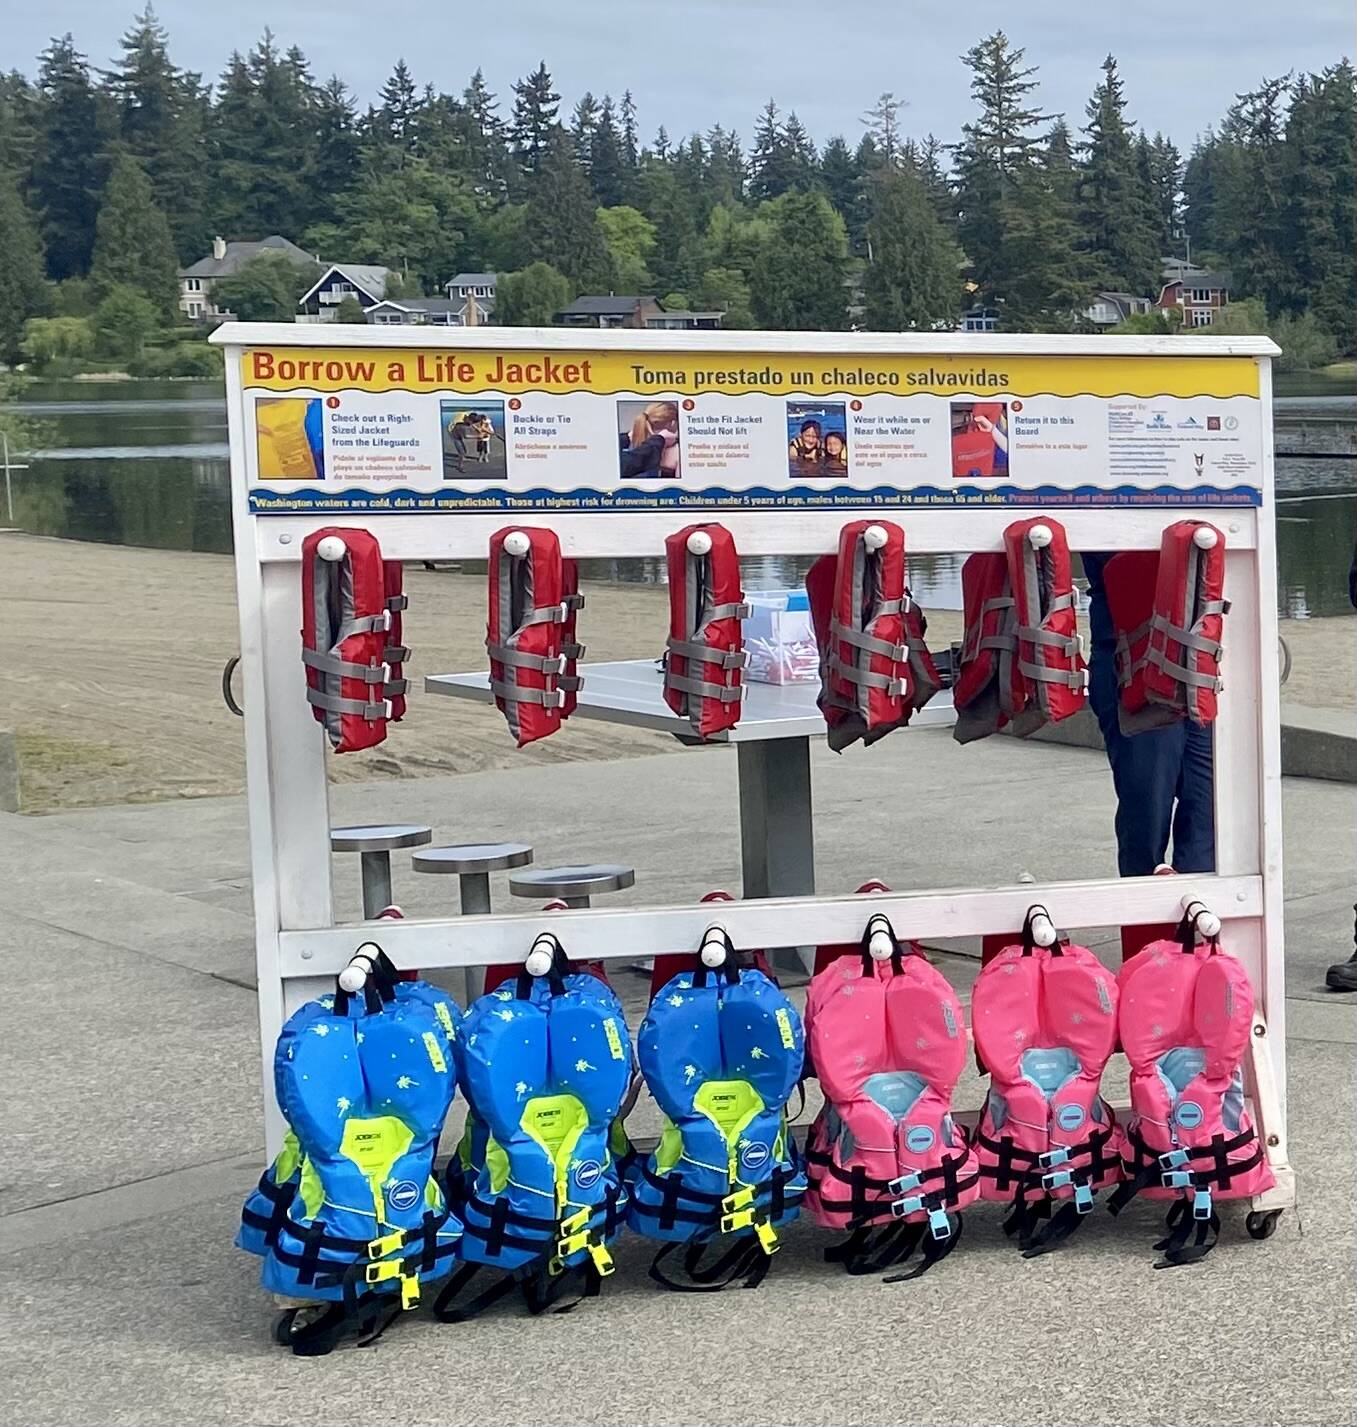 This year, several agencies have partnered to provide a free collection of loaner life jackets for the public at Steel Lake Park. Olivia Sullivan / The Mirror